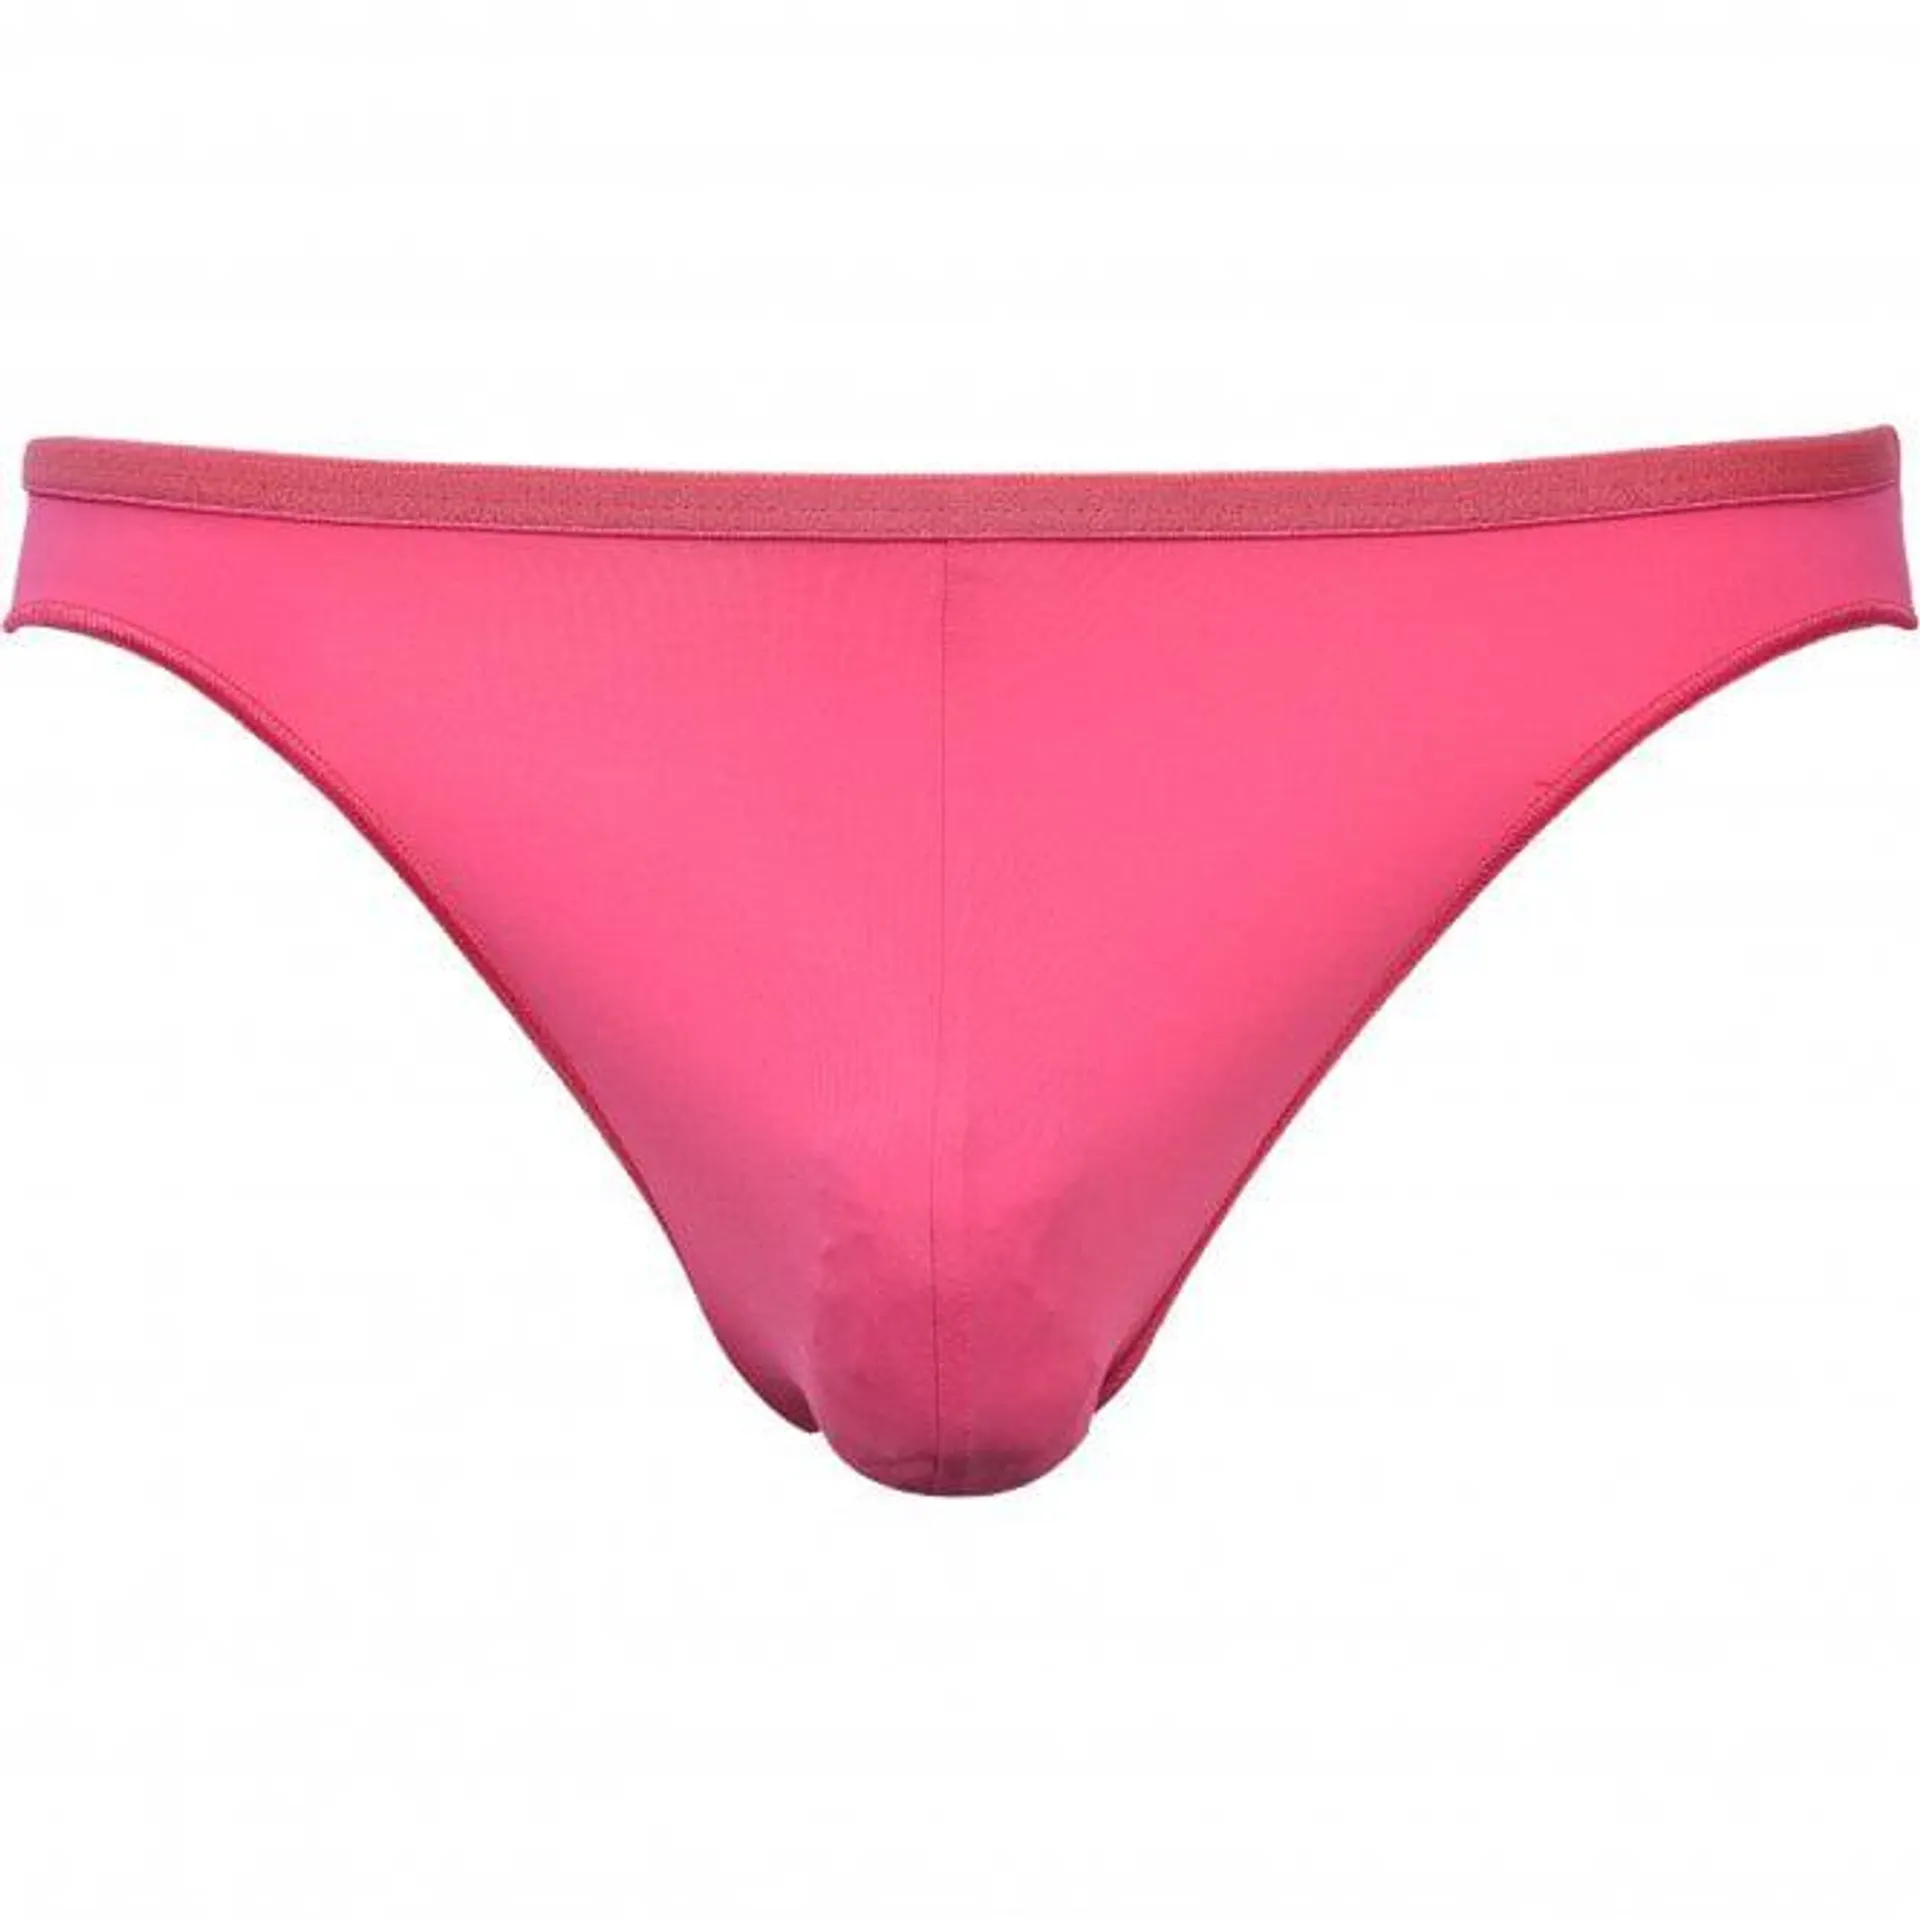 Plume Micro Brief, Pink